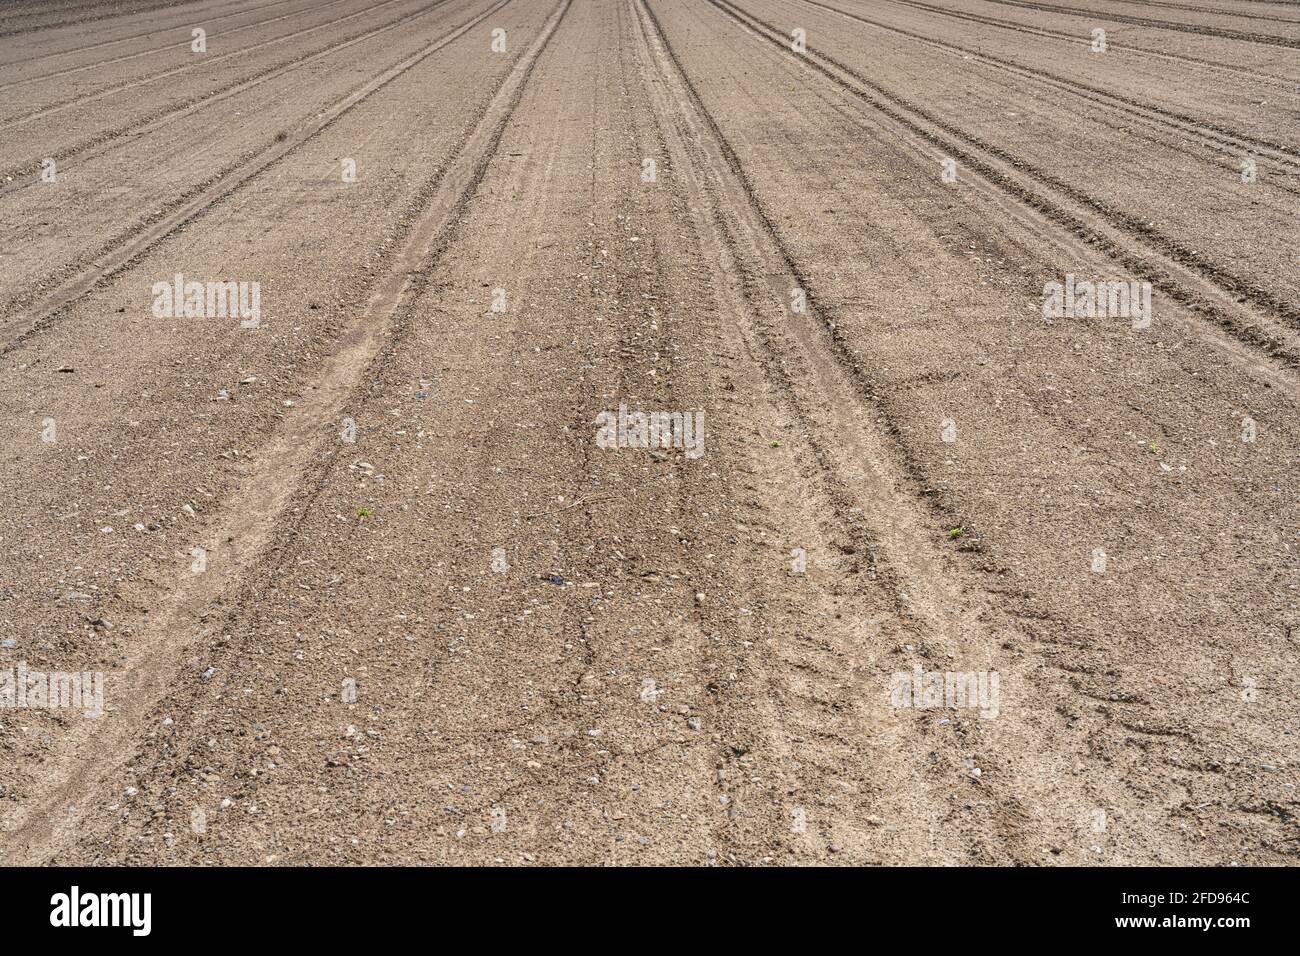 view of the soil of a plowed and pressed field, ready for sowing in spring Stock Photo